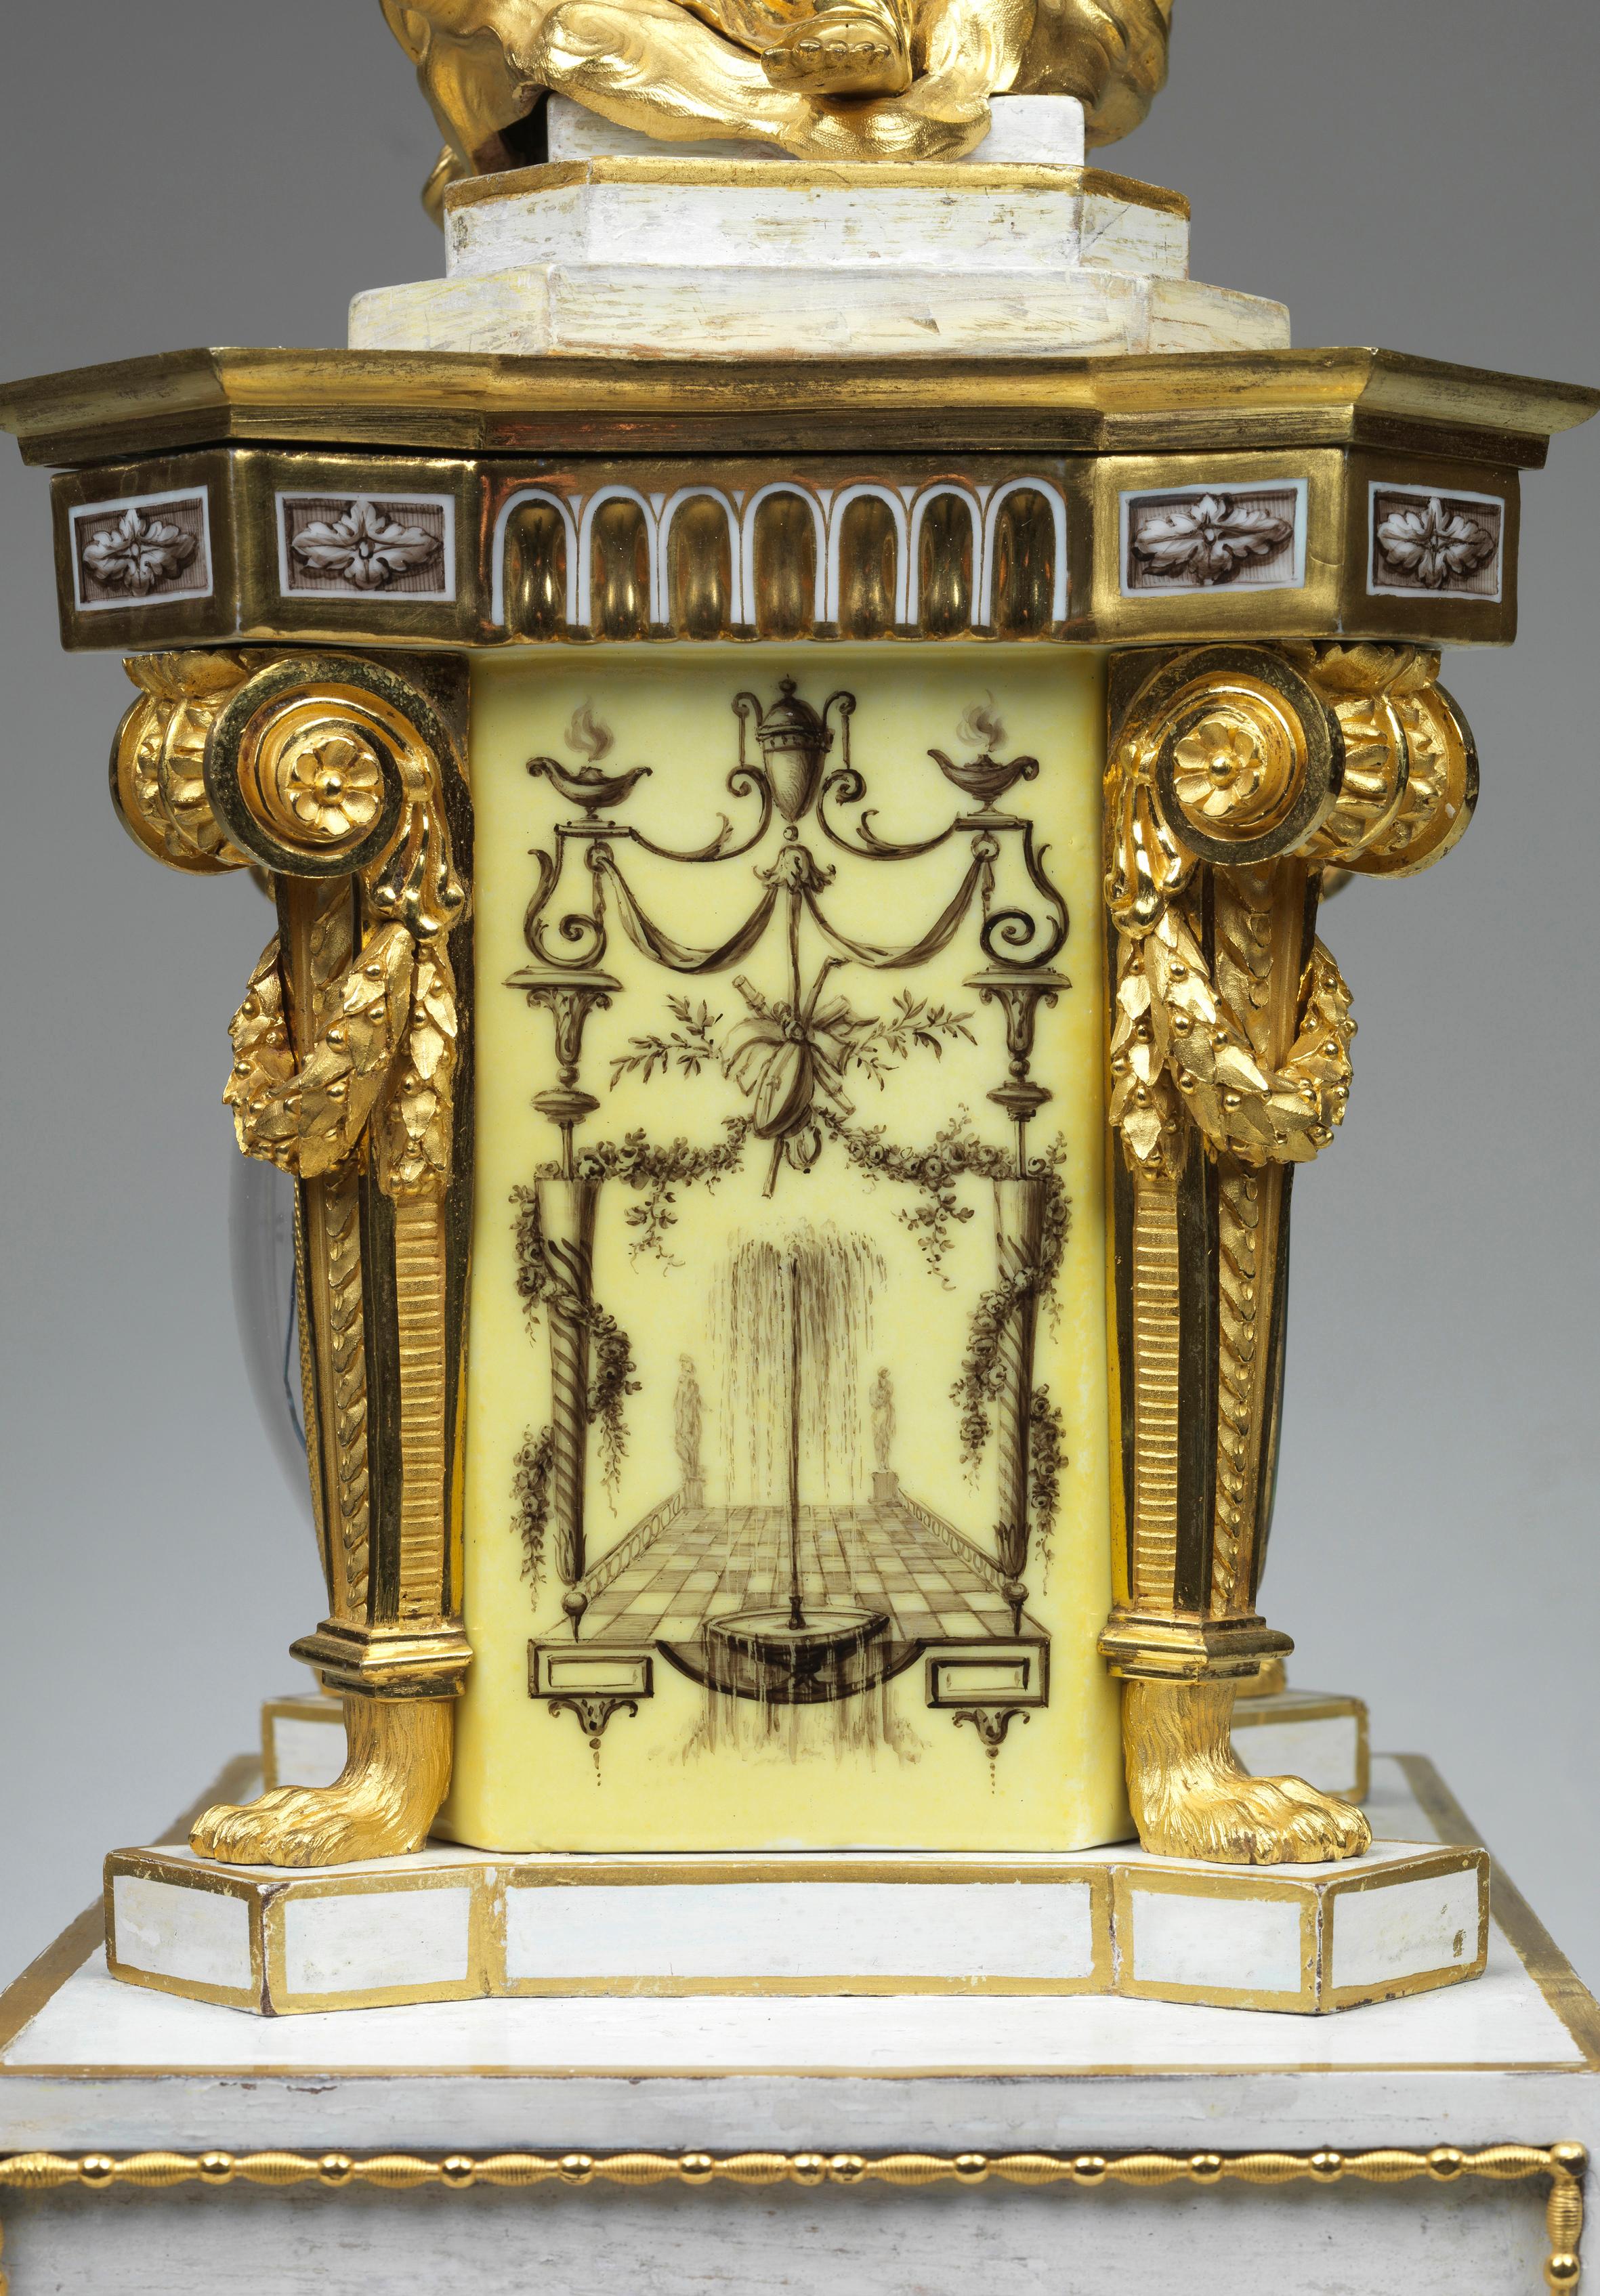 On a rectangular painted base, set on four ormolu feet, with an ormolu mounted yellow porcelain case, with white enamel dial signed by Lesieur a Paris. Above the case sits a stepped rectangular painted hood, with a figure of a woman in ormolu,